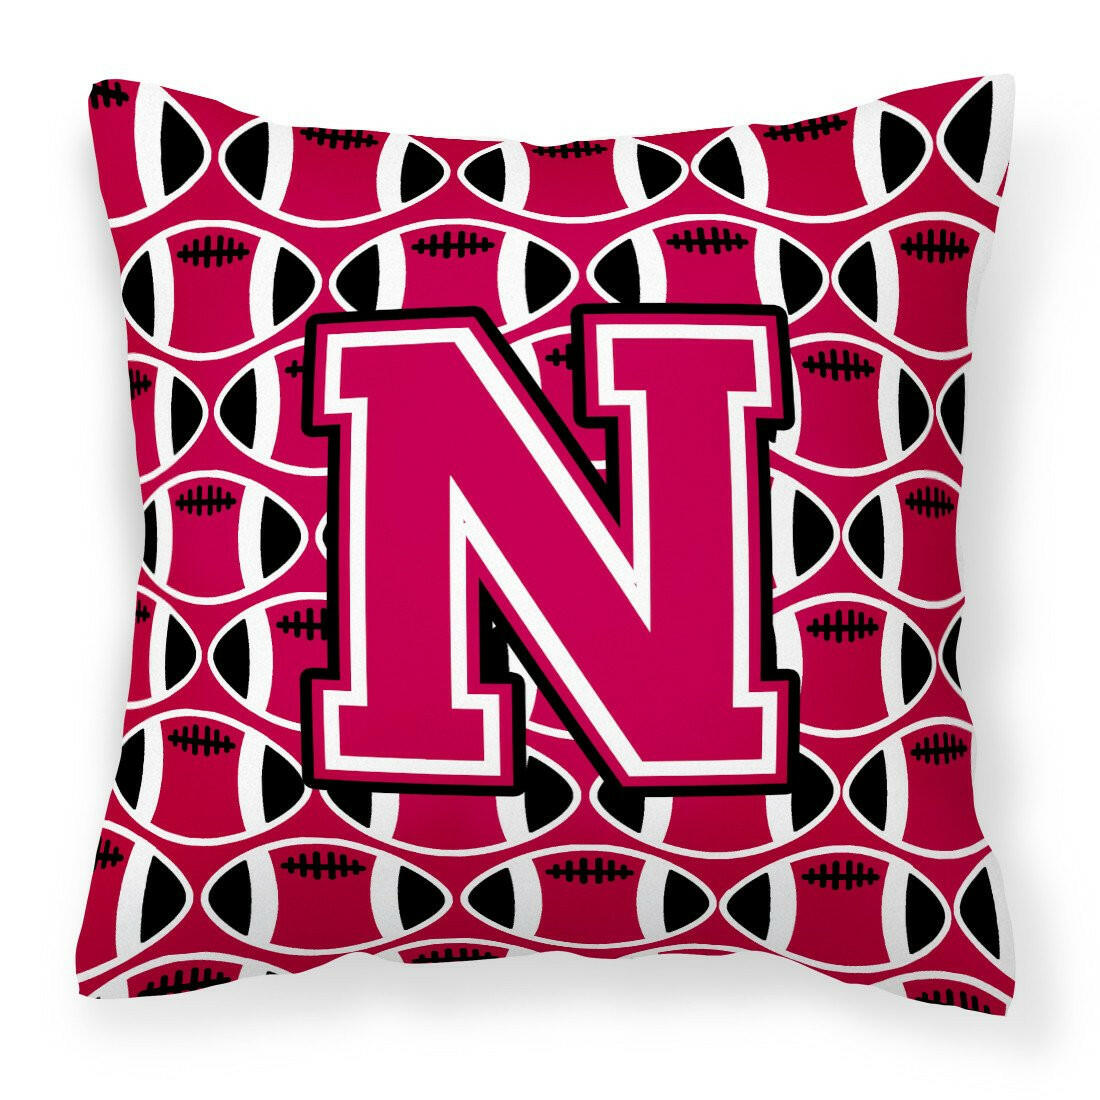 Letter N Football Crimson and White Fabric Decorative Pillow CJ1079-NPW1414 by Caroline's Treasures